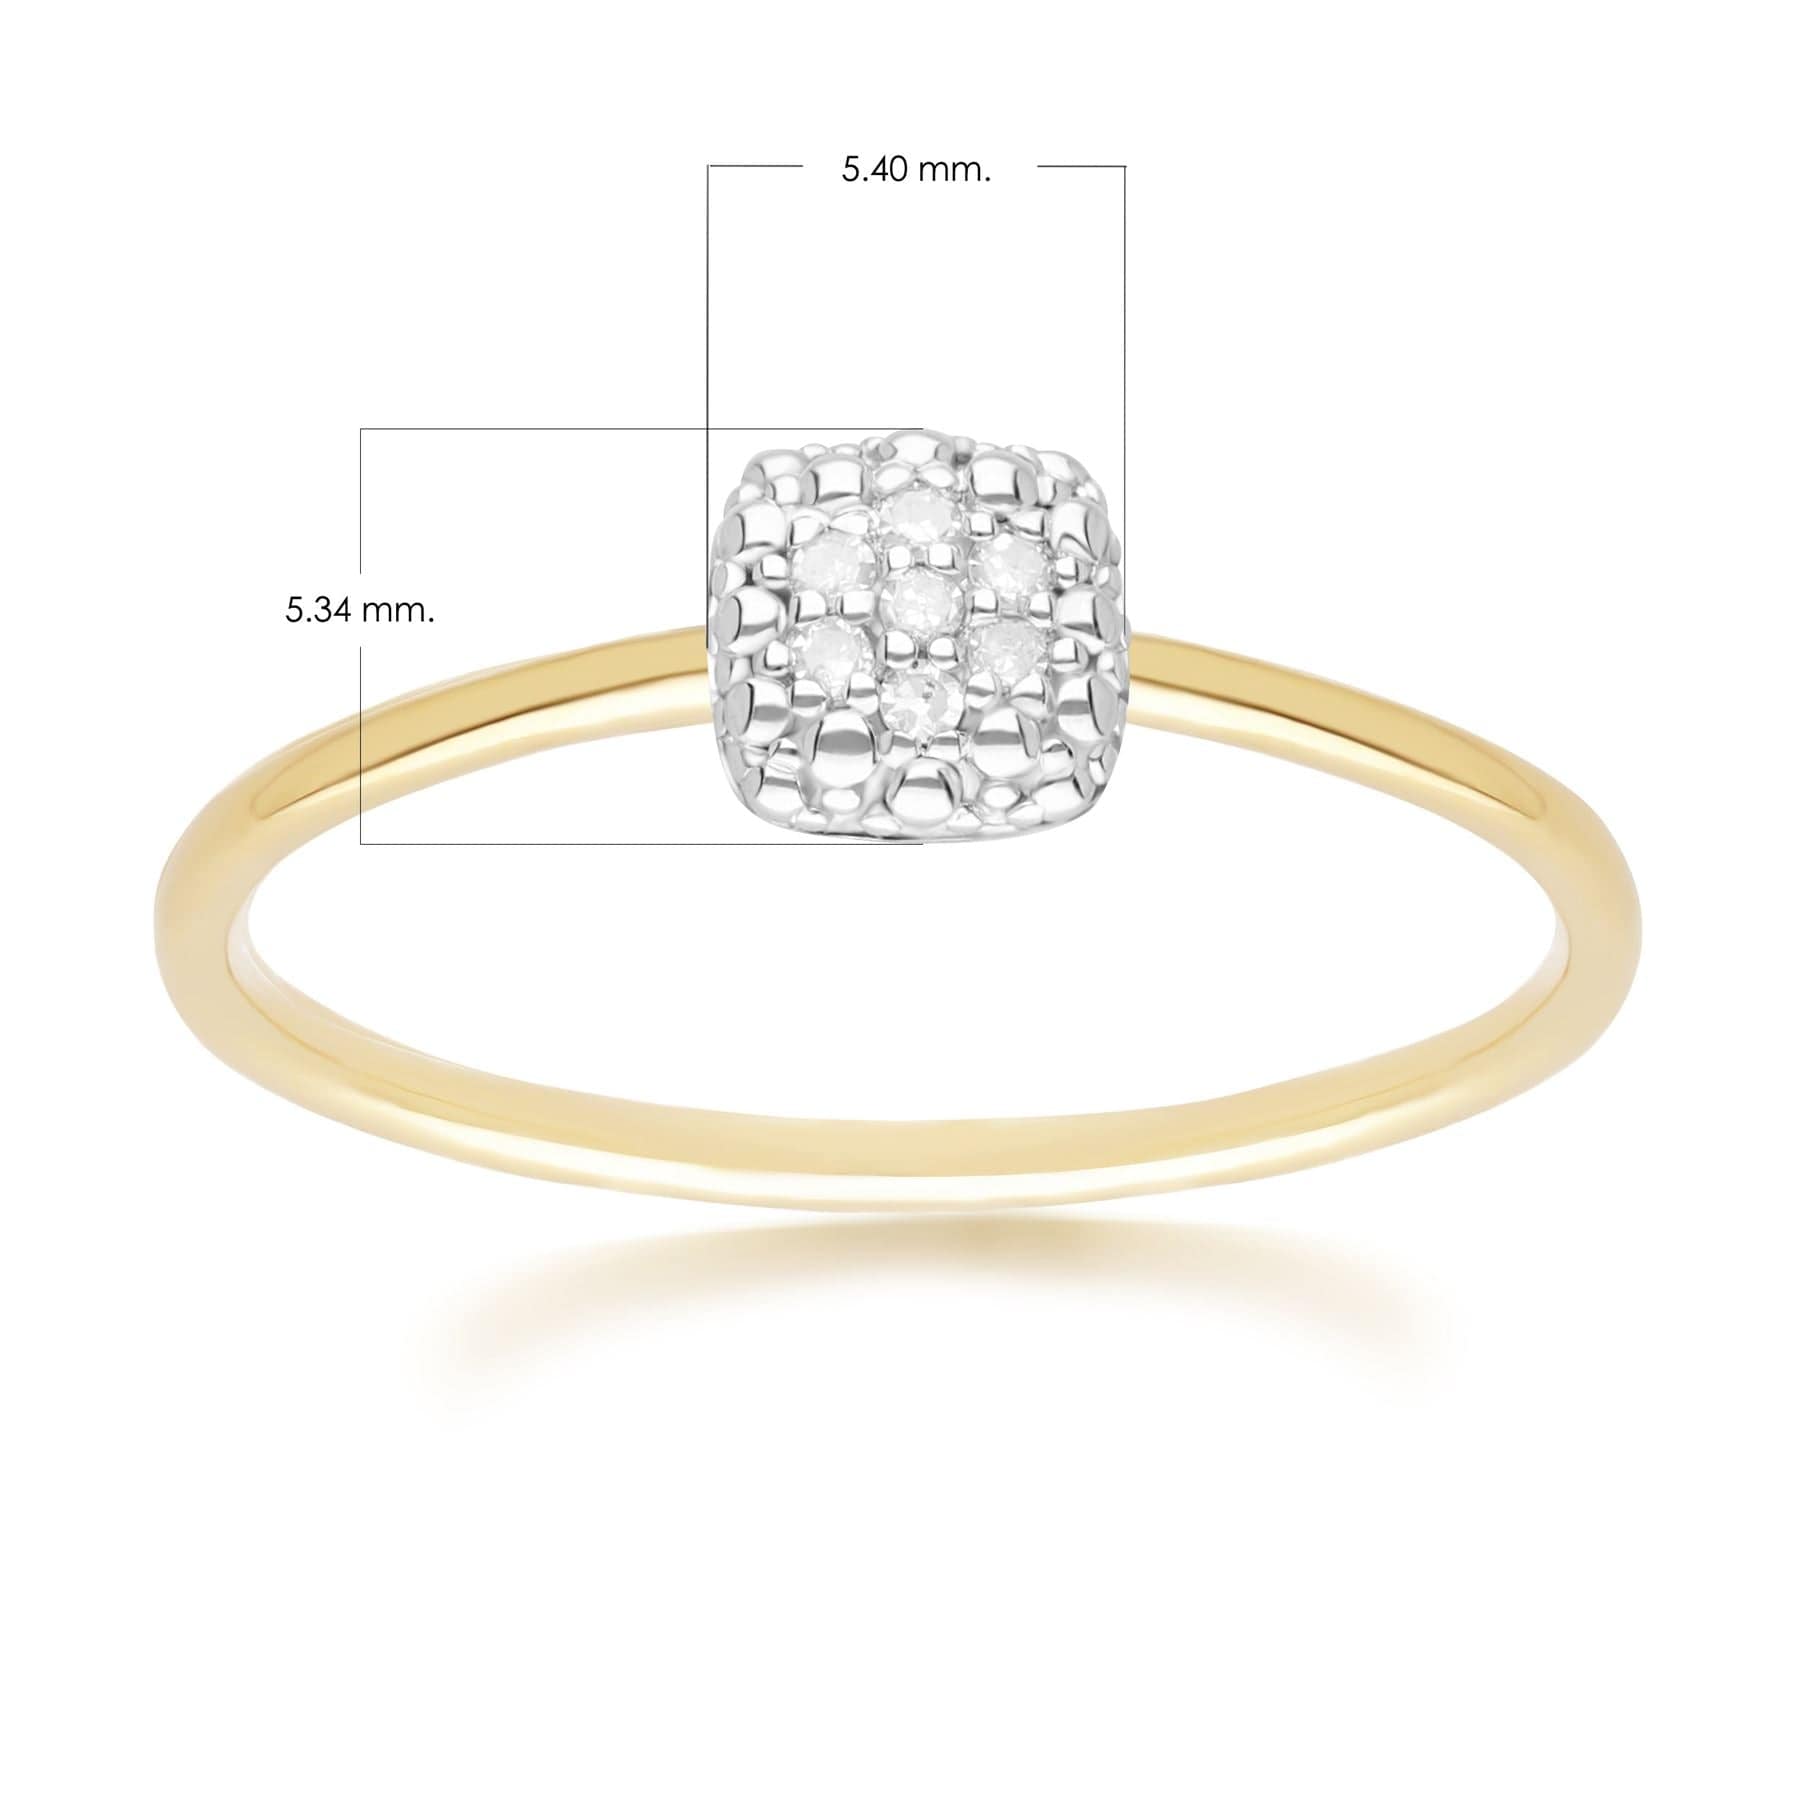 191R0933019 Diamond Pave Square Ring 9ct Yellow Gold Dimensions